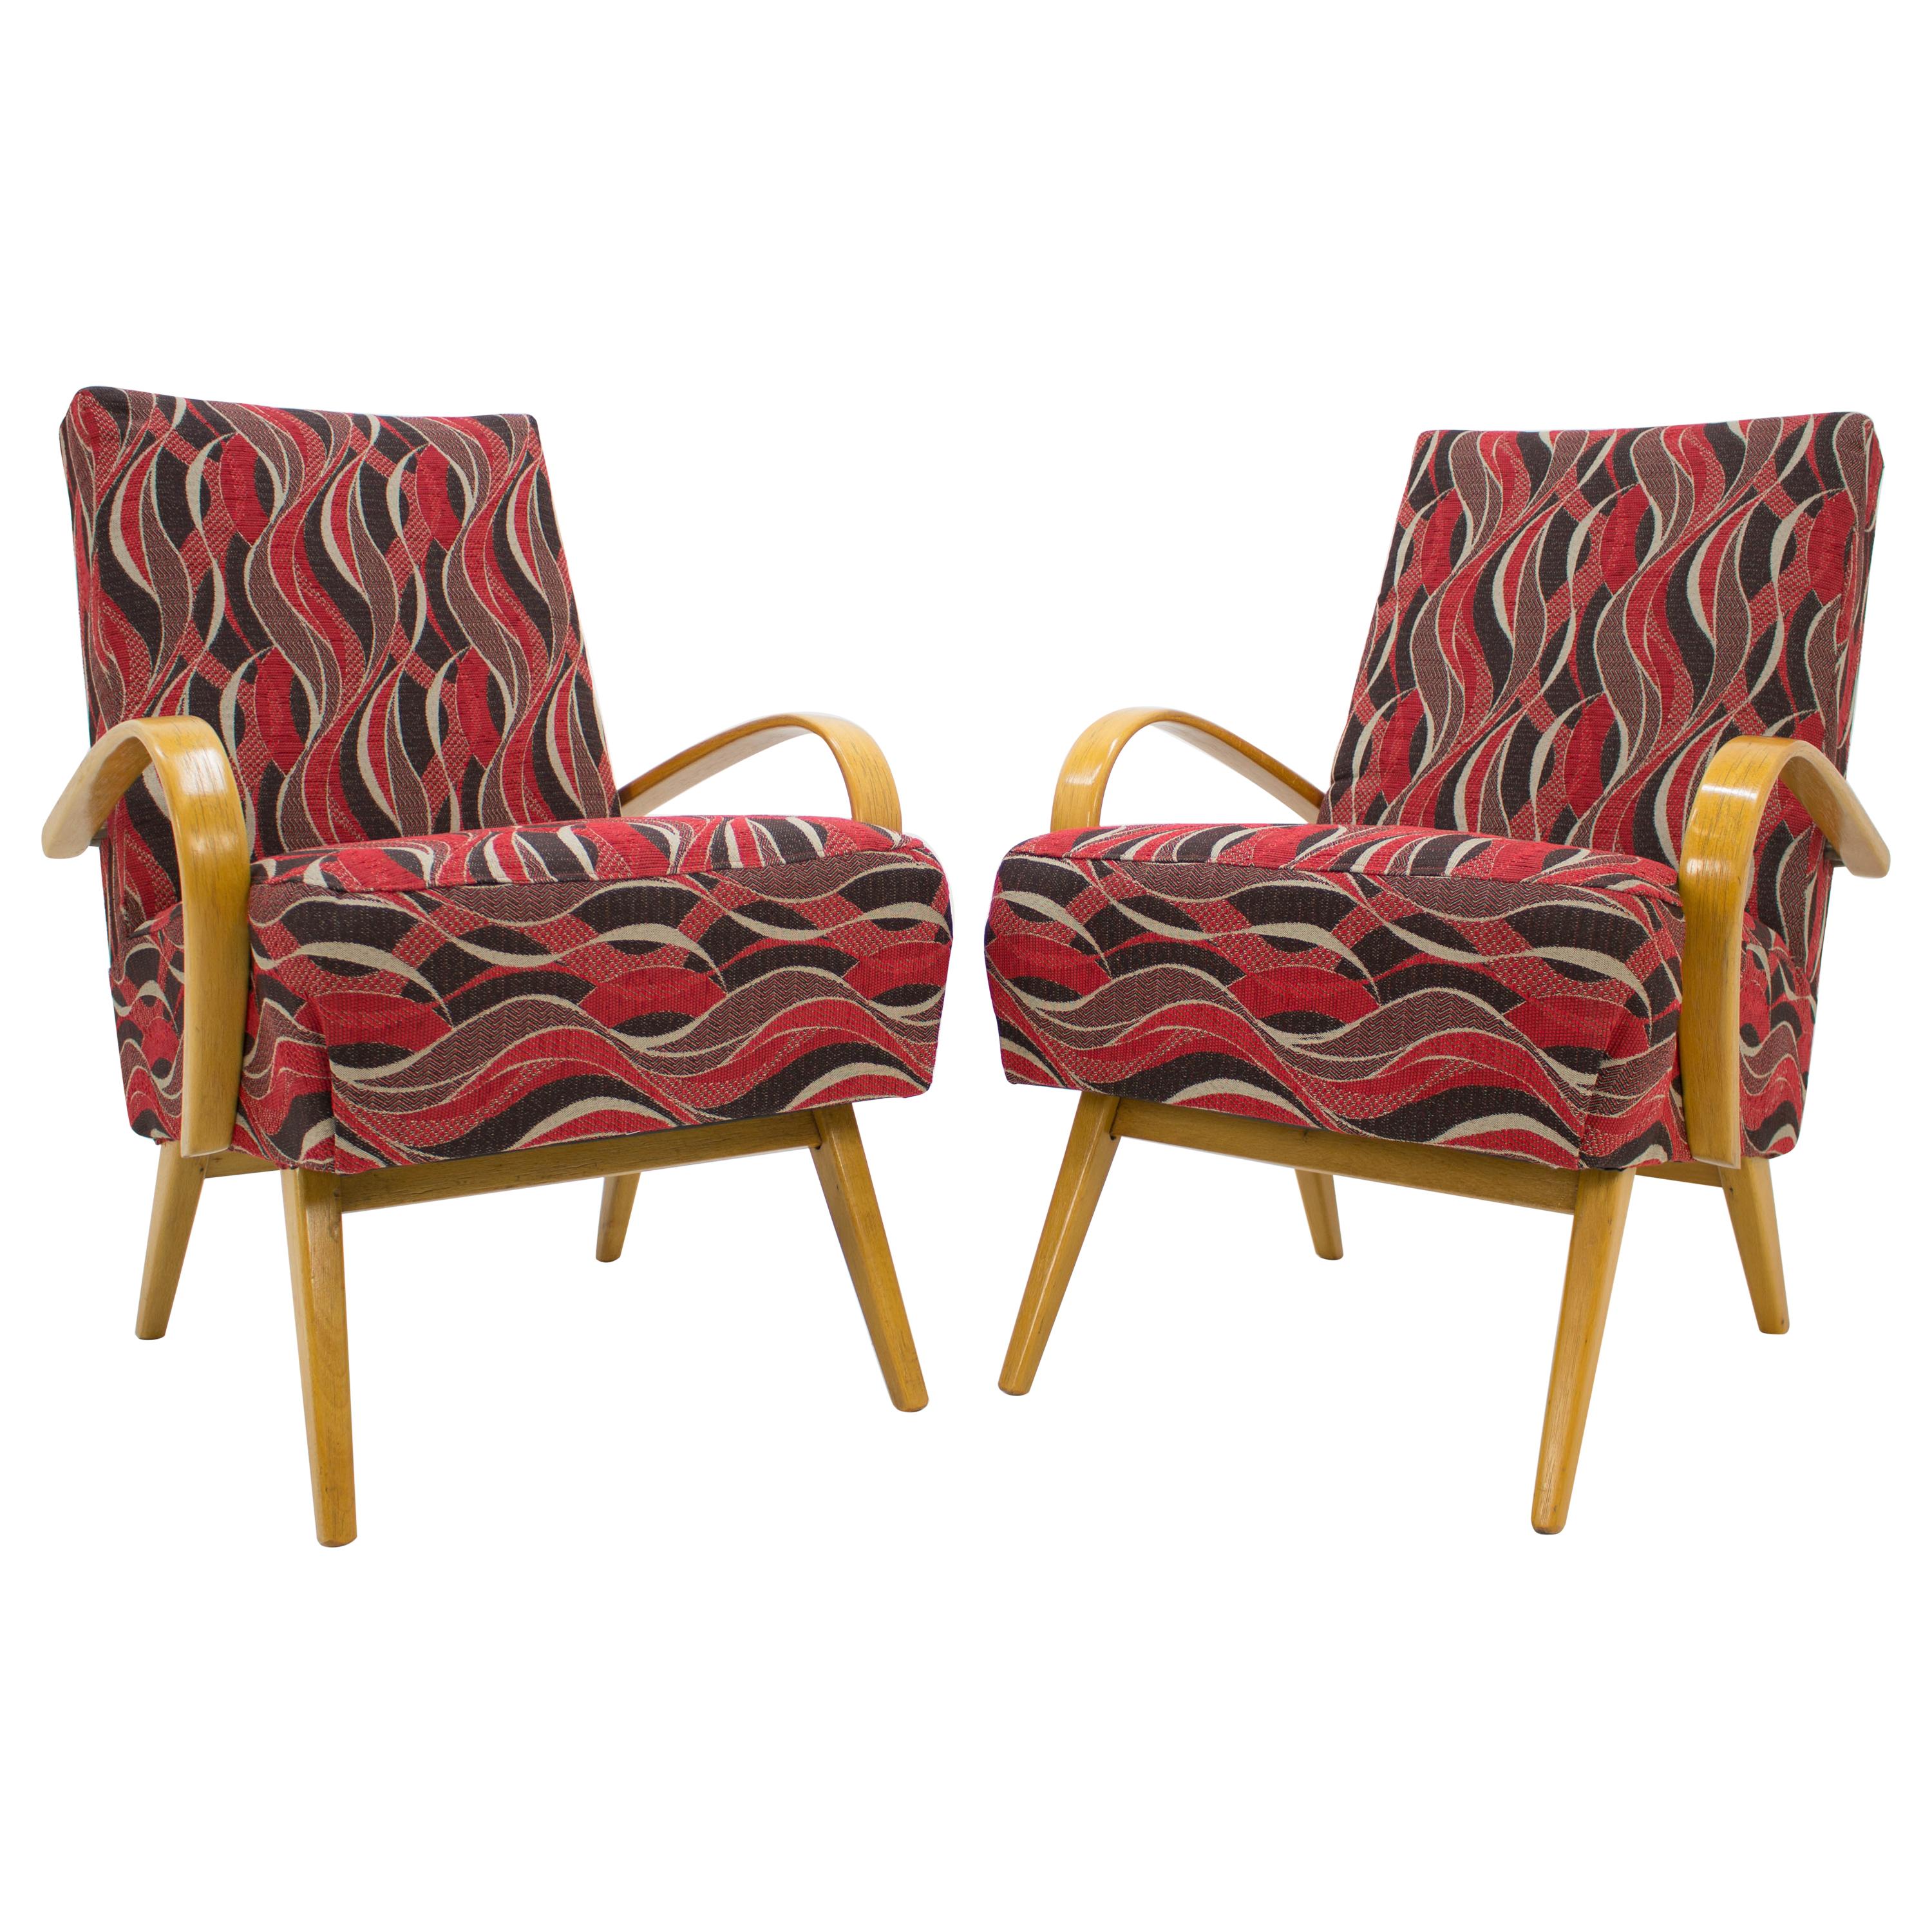 Set of Two Armchairs by Jaroslav Smidek for TON, 1960s